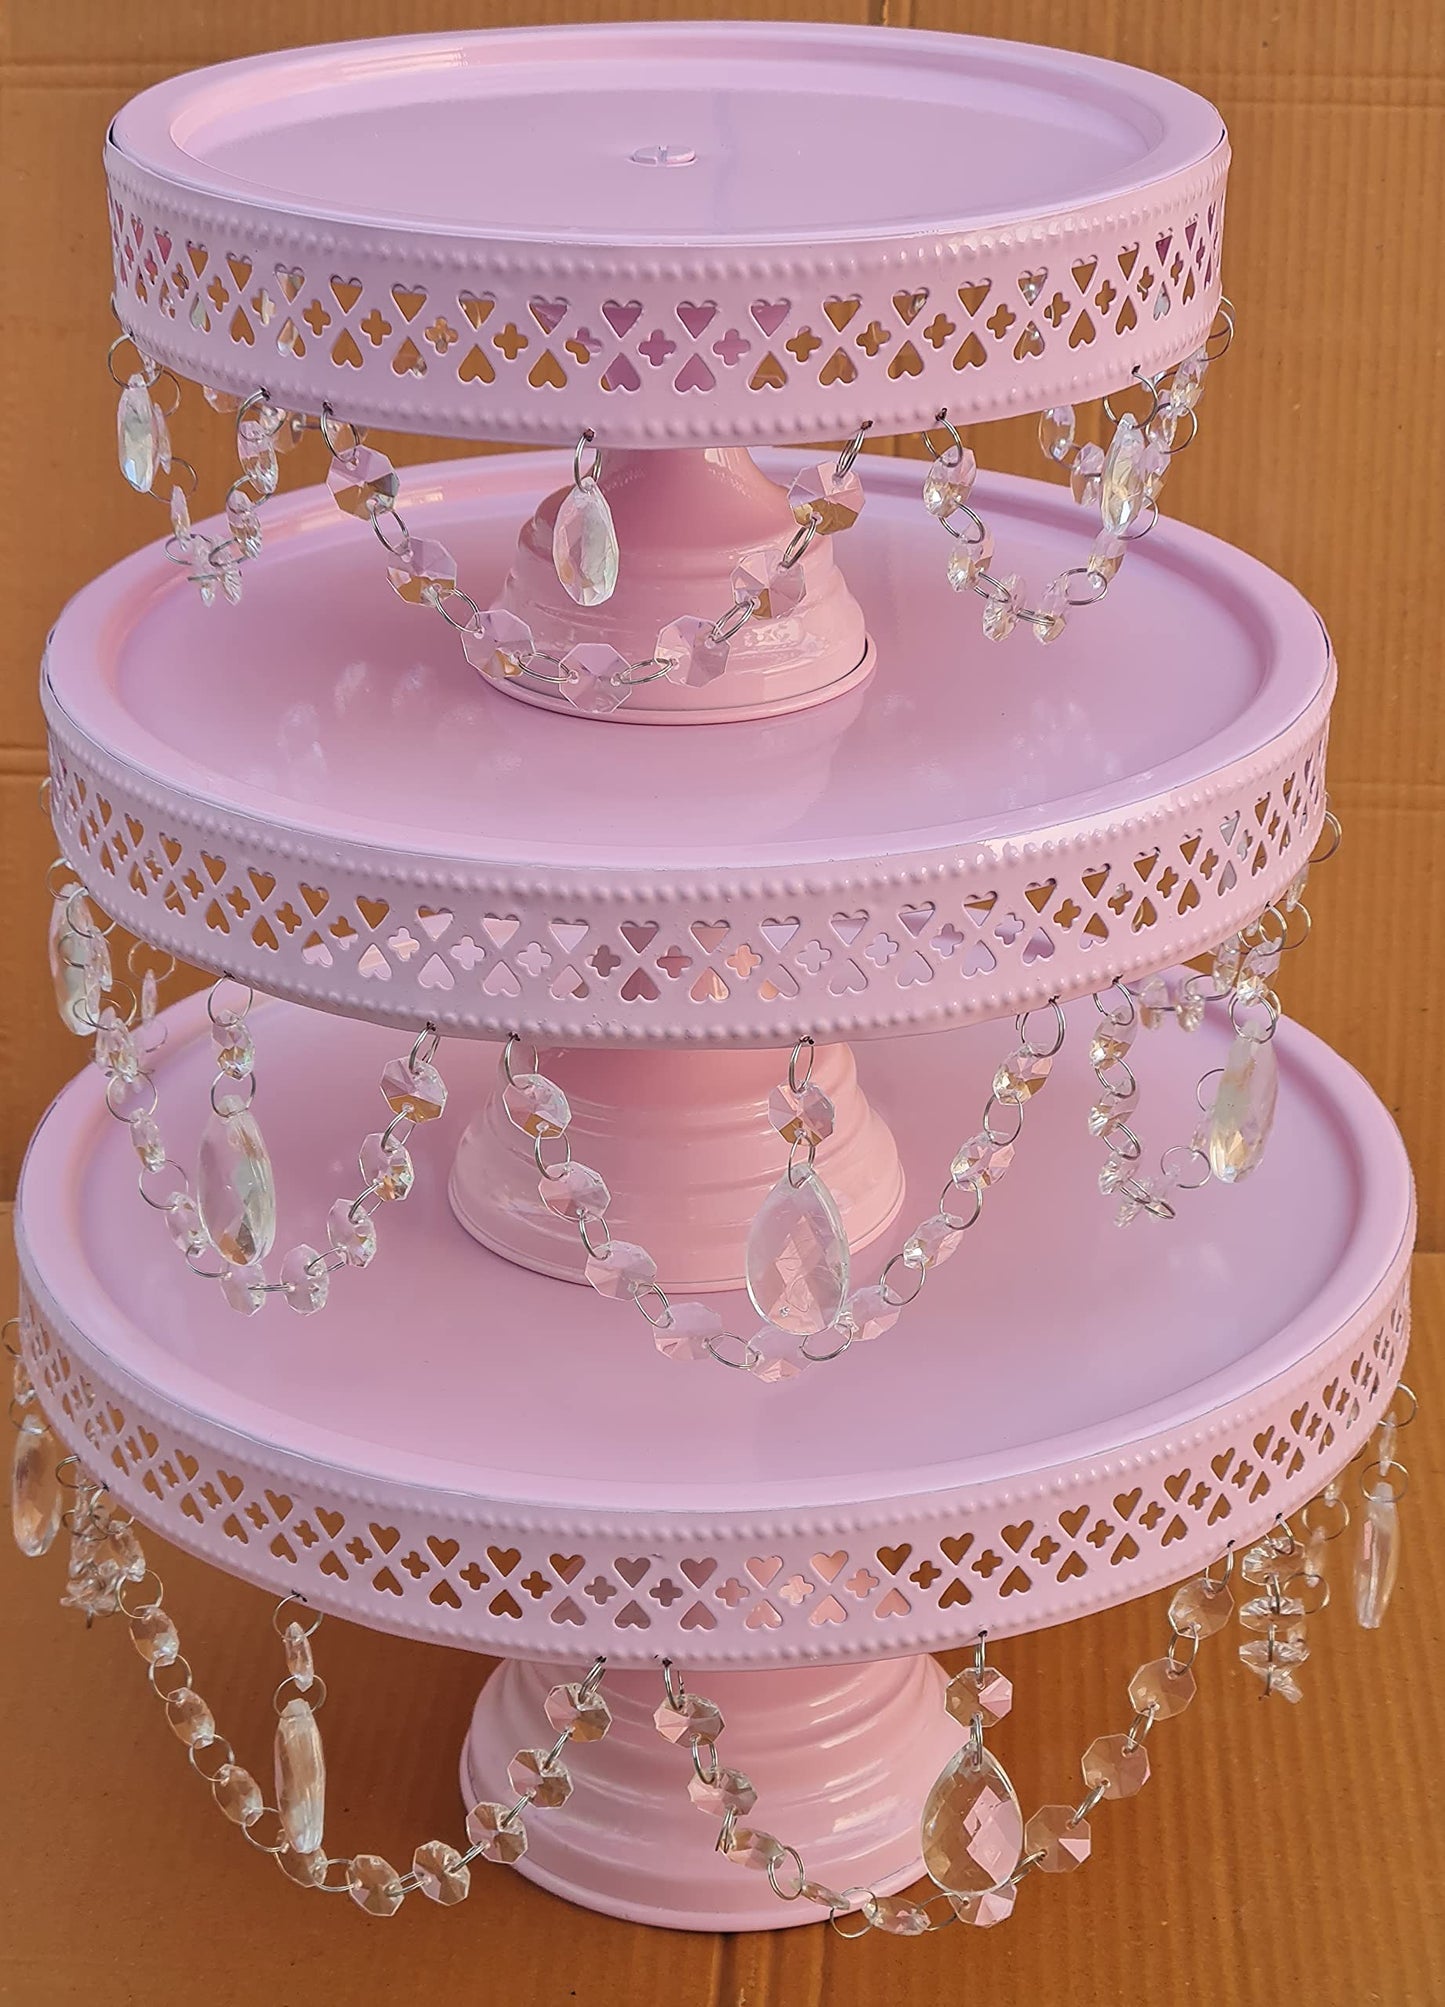 GiftBay Creations - Cake Stand Pedestal Round Strong Metal with Clear Hanging Crystals Set/3 (9-Inch, 11-Inch, 13-Inch, Pink)